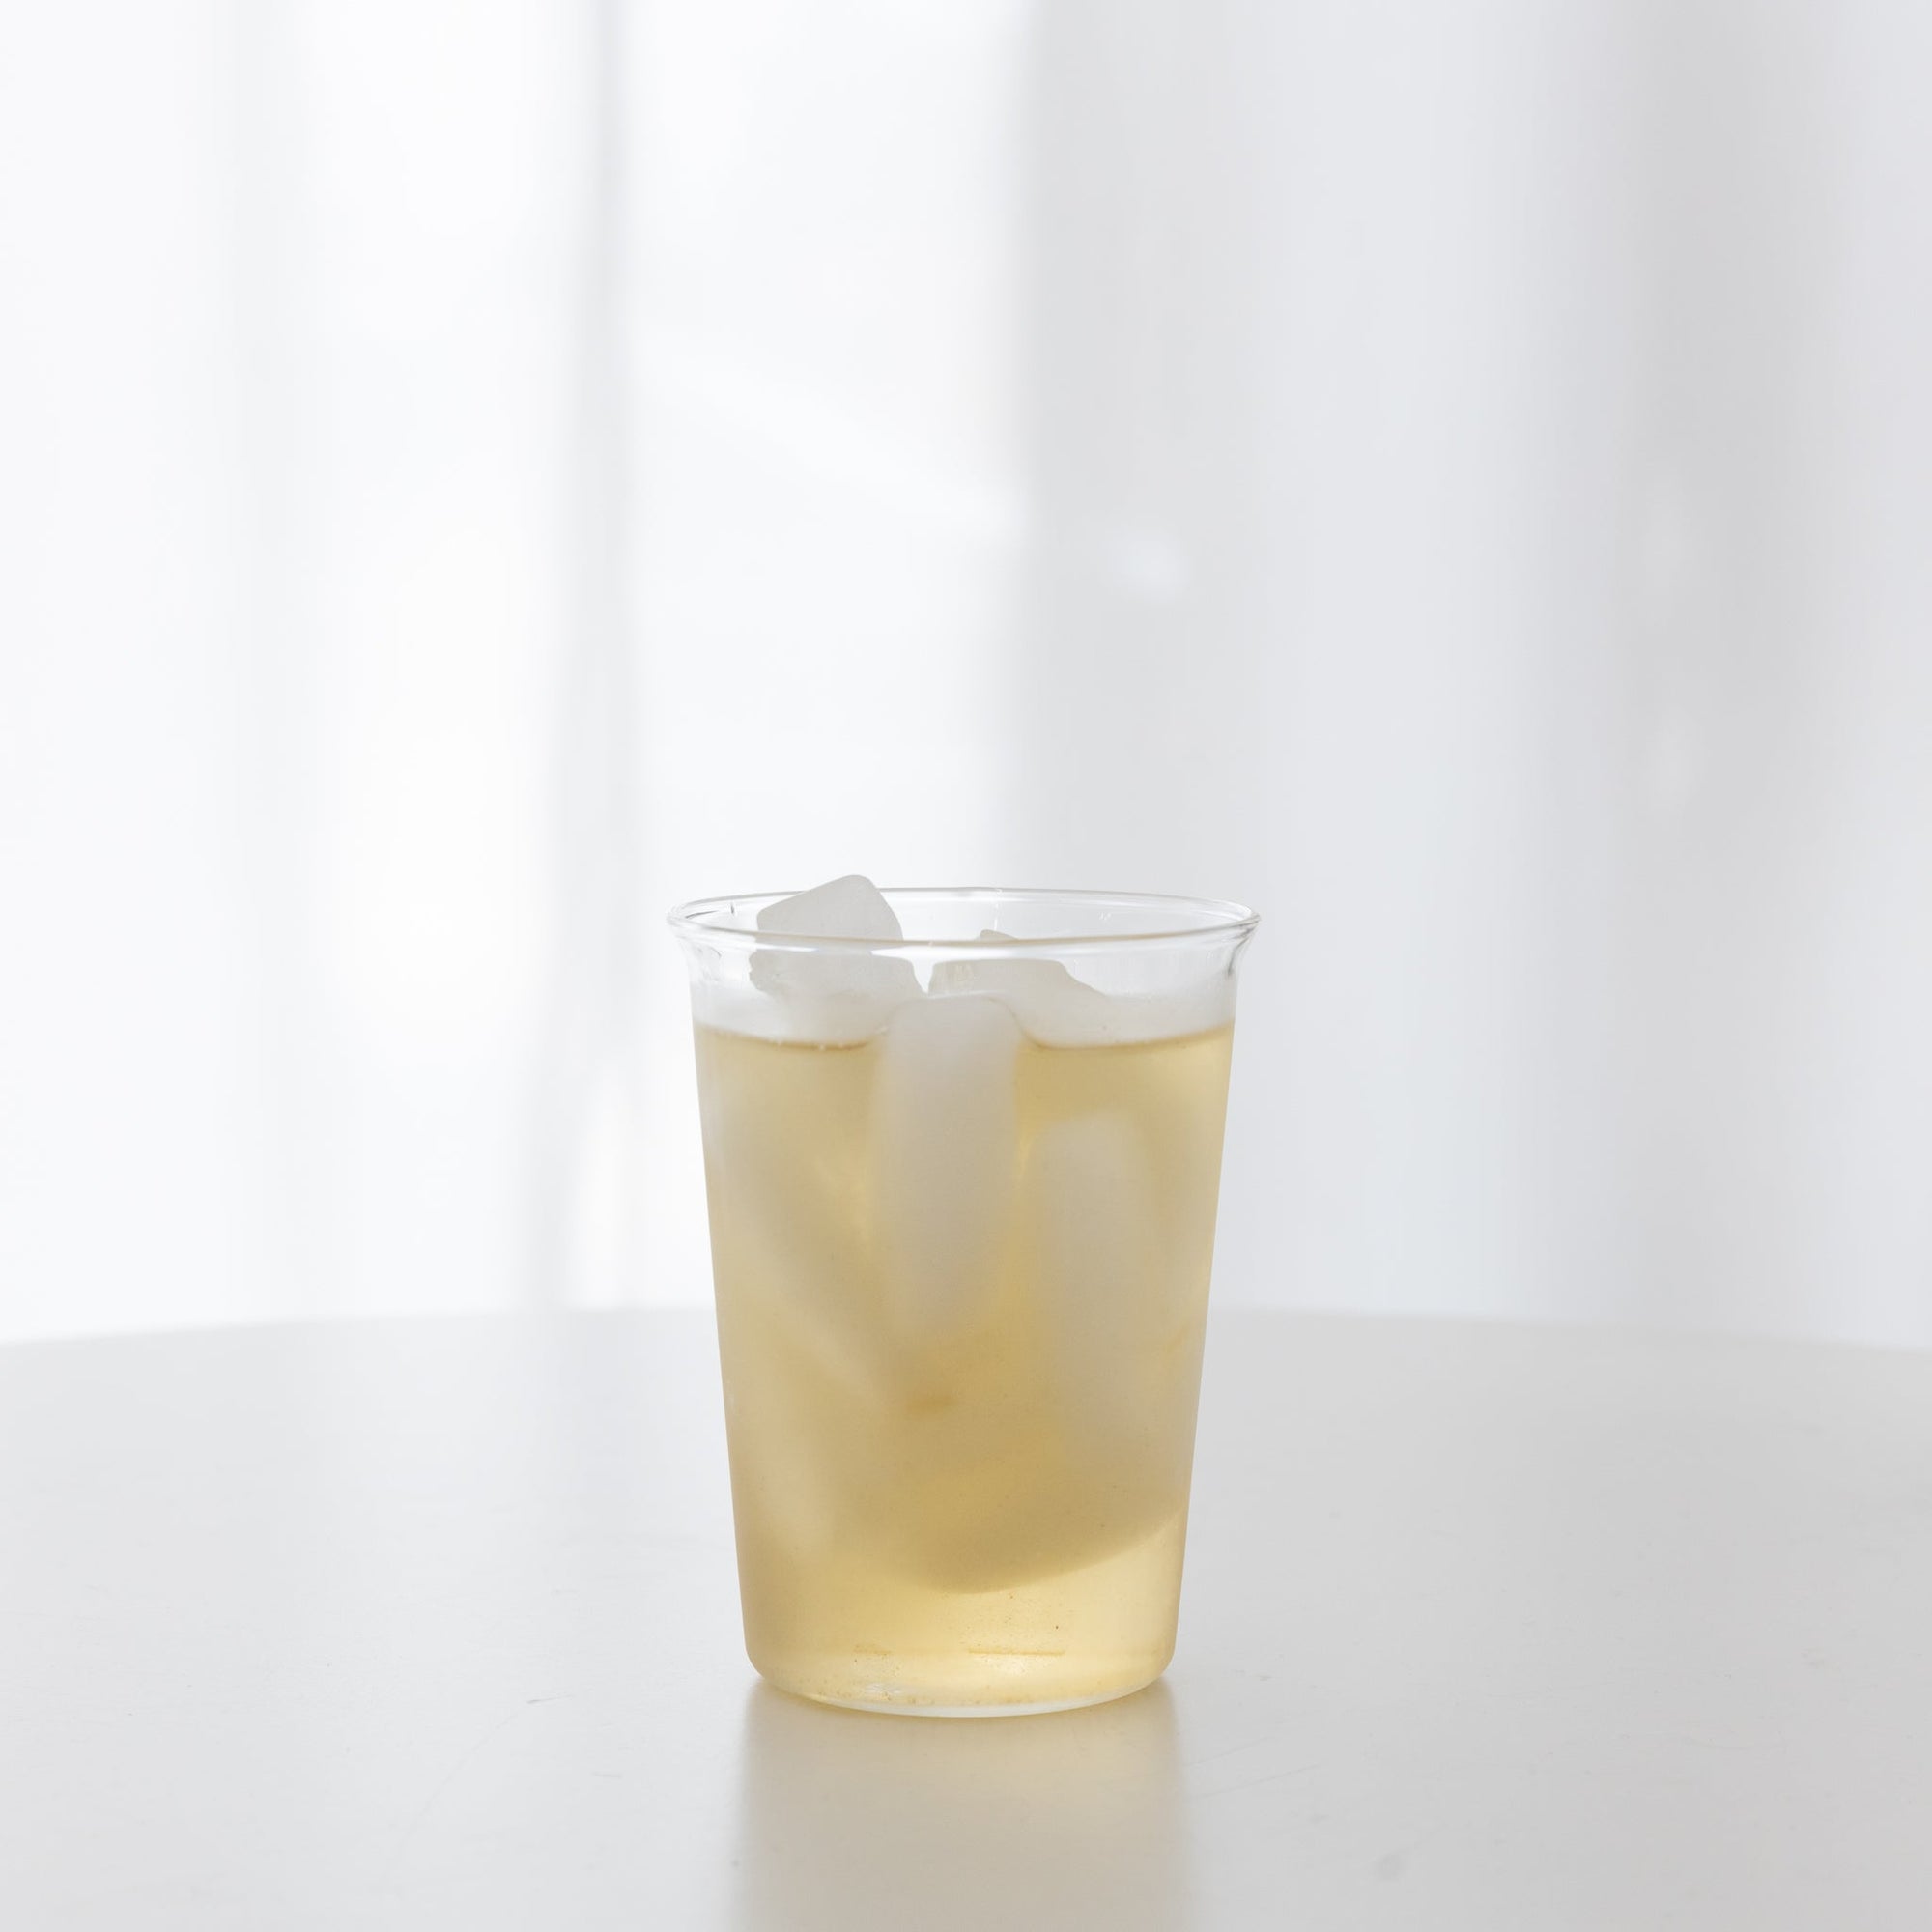 KINTO Cast Iced Tea and Beer Glasses | Tortoise General Store